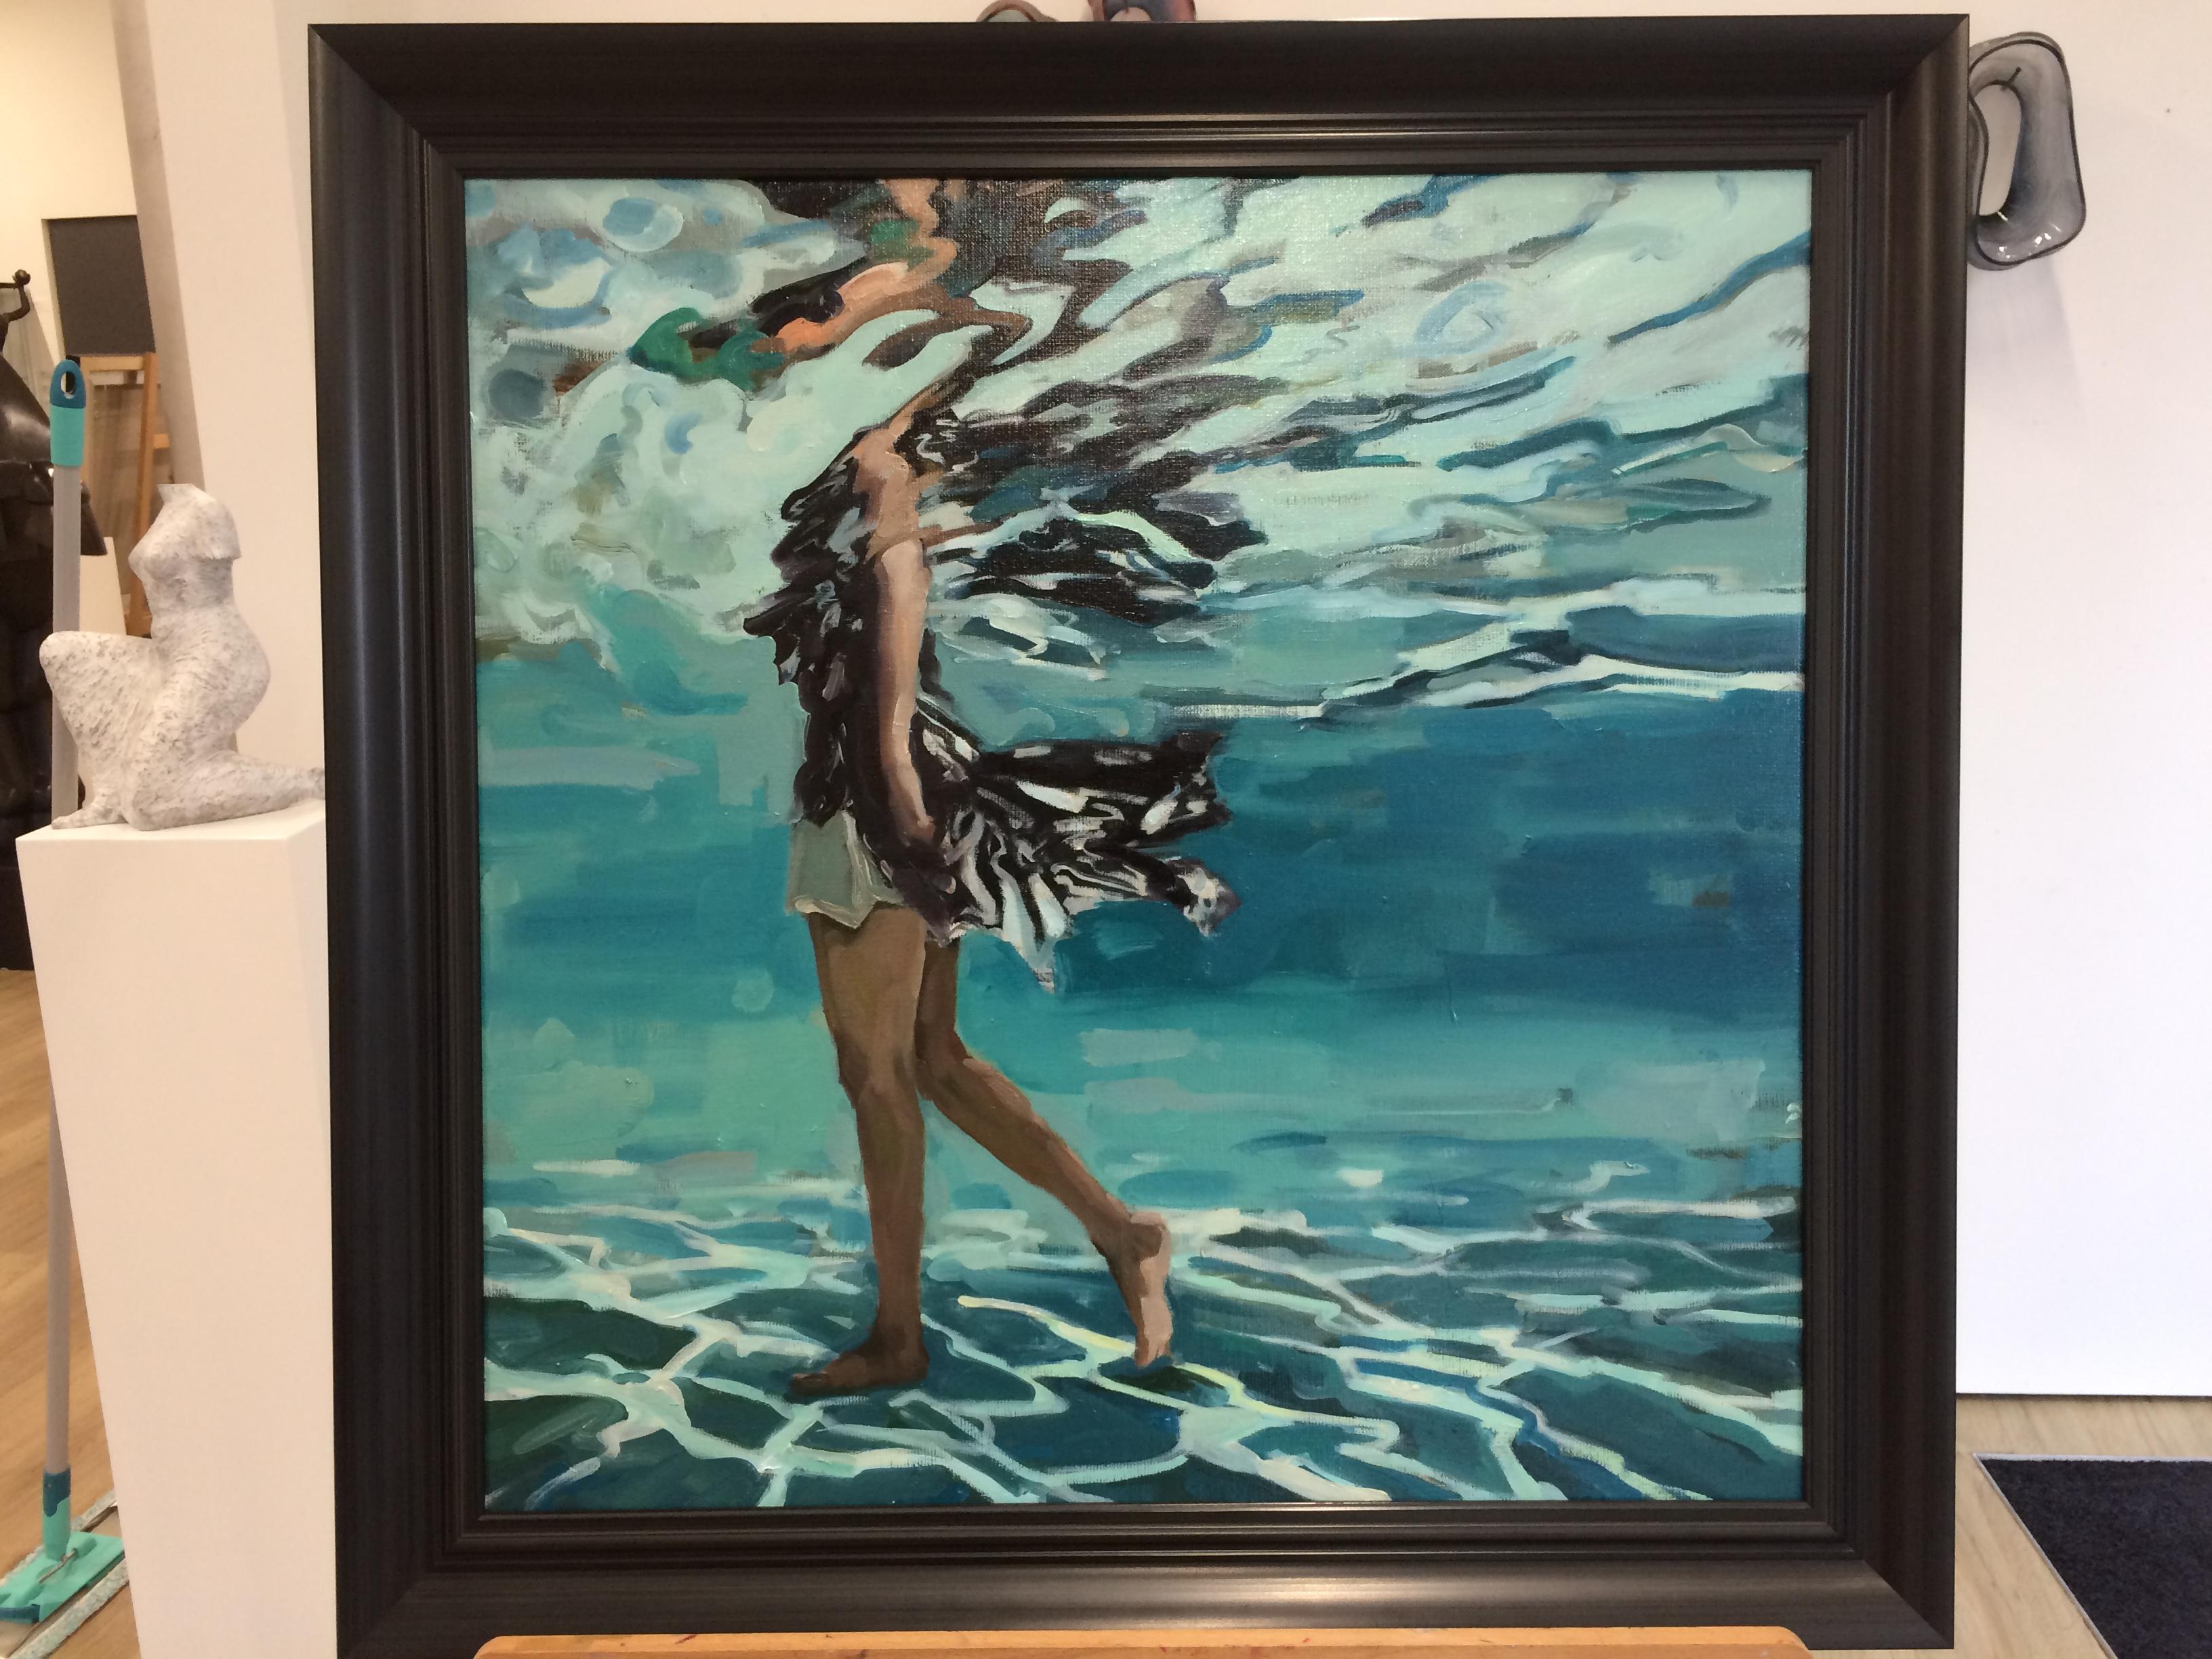 Ripples- 21st Century Contemporary Painting of a Girl Floating through the Water - Blue Landscape Painting by Jantien de Boer